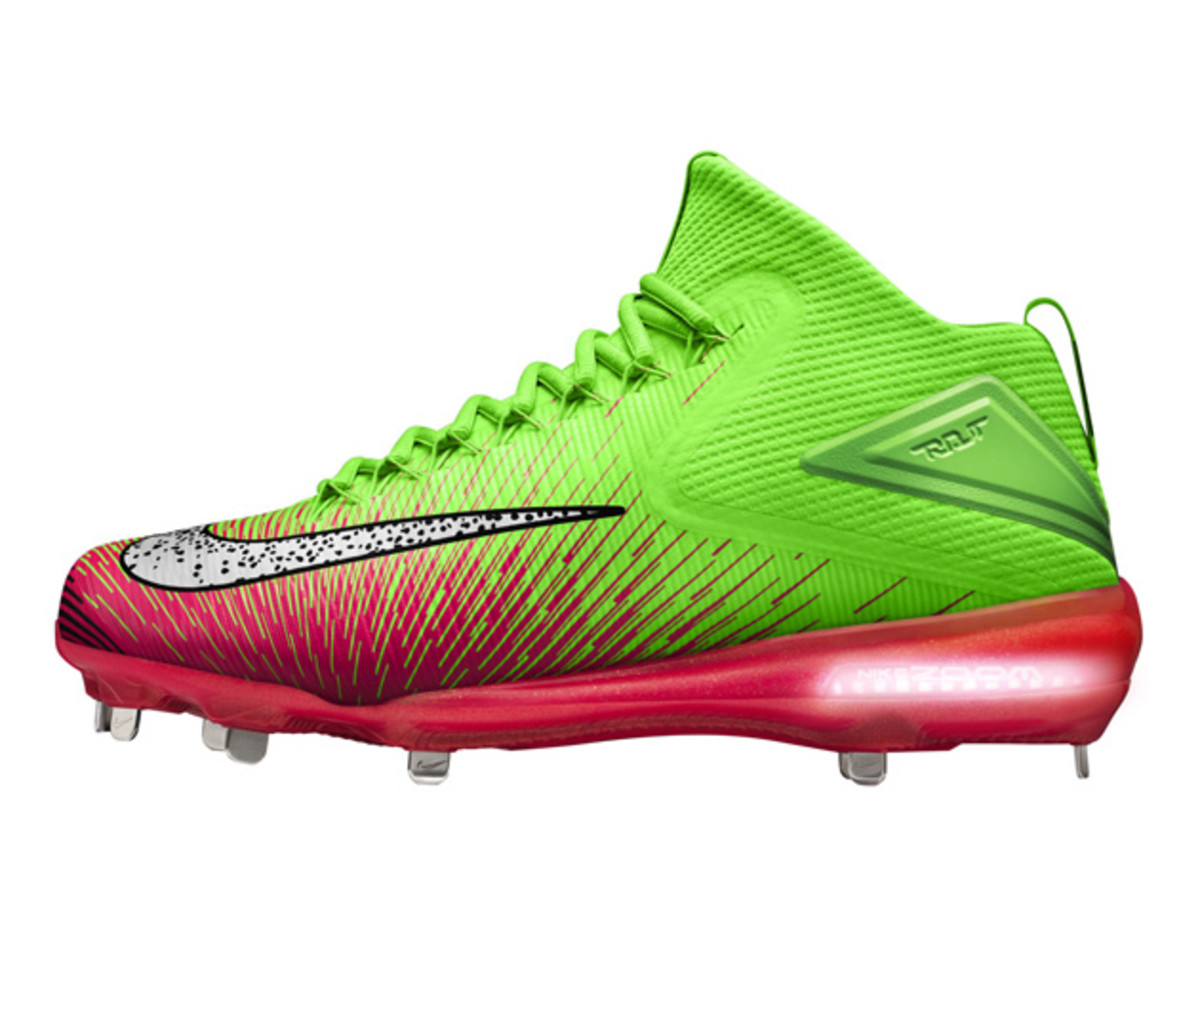 mike trout cleats